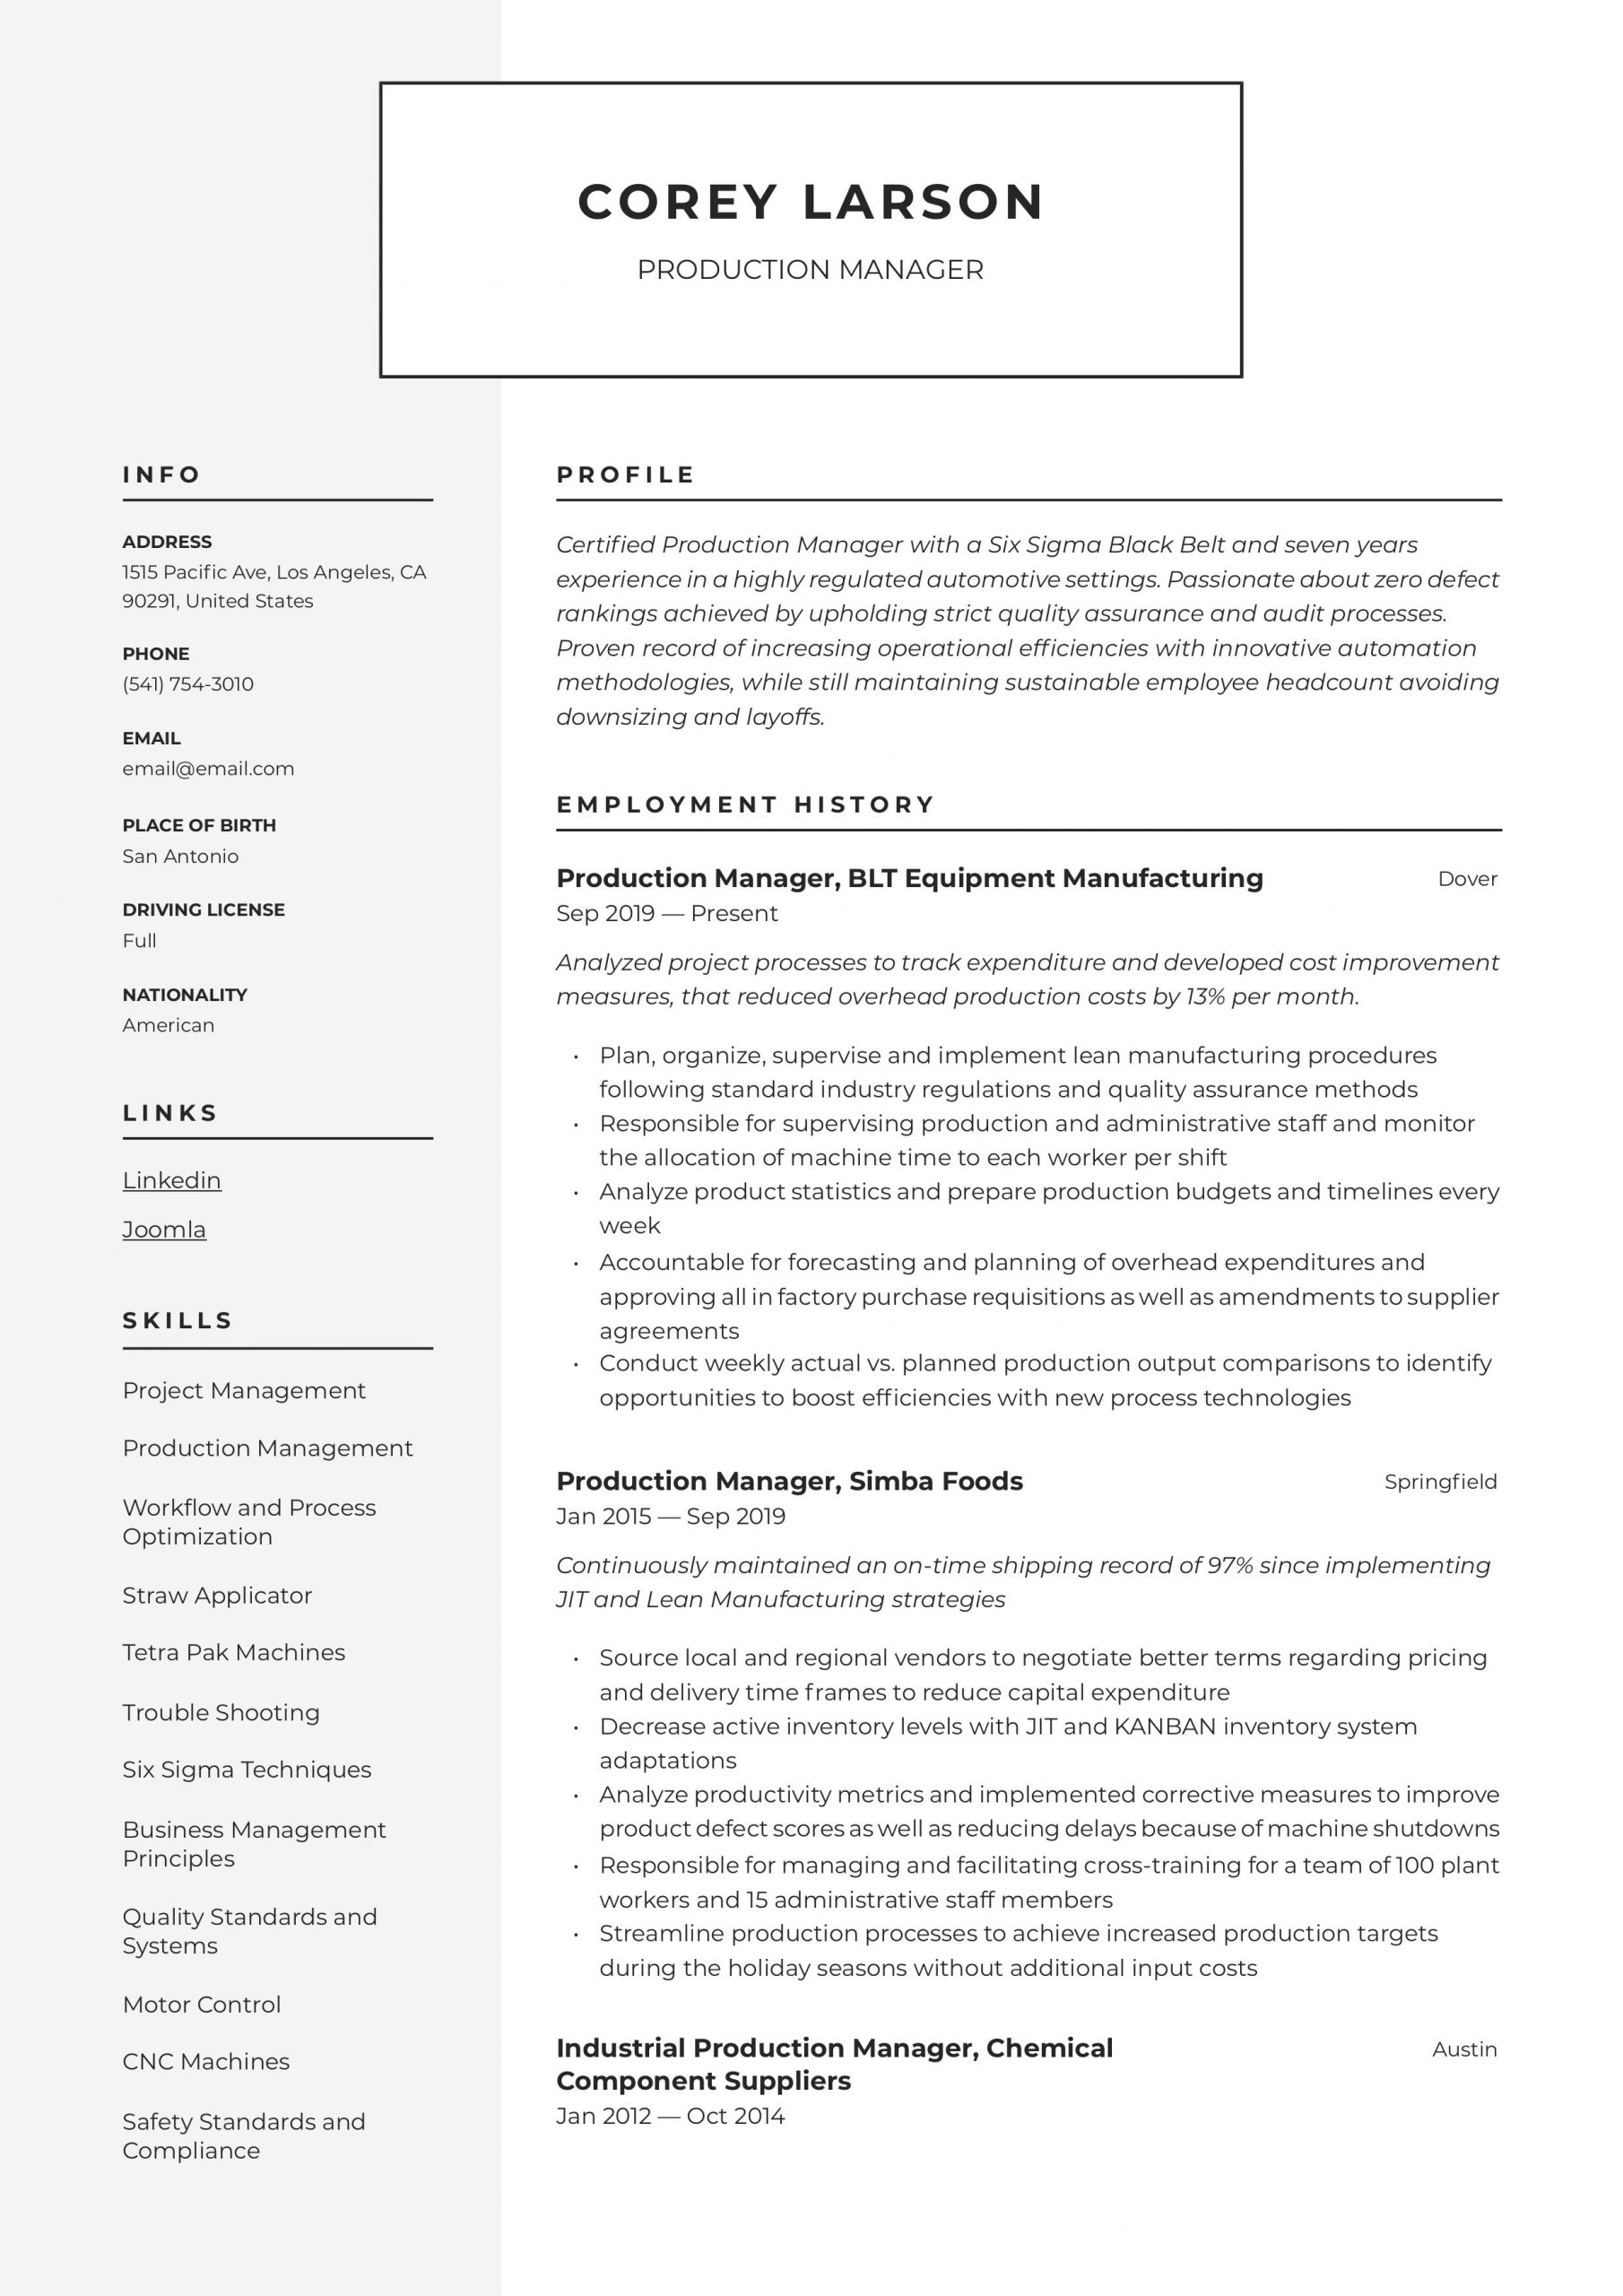 Sample Resume for Production Manager In India Production Manager Resume & Writing Guide  12 Templates 2020